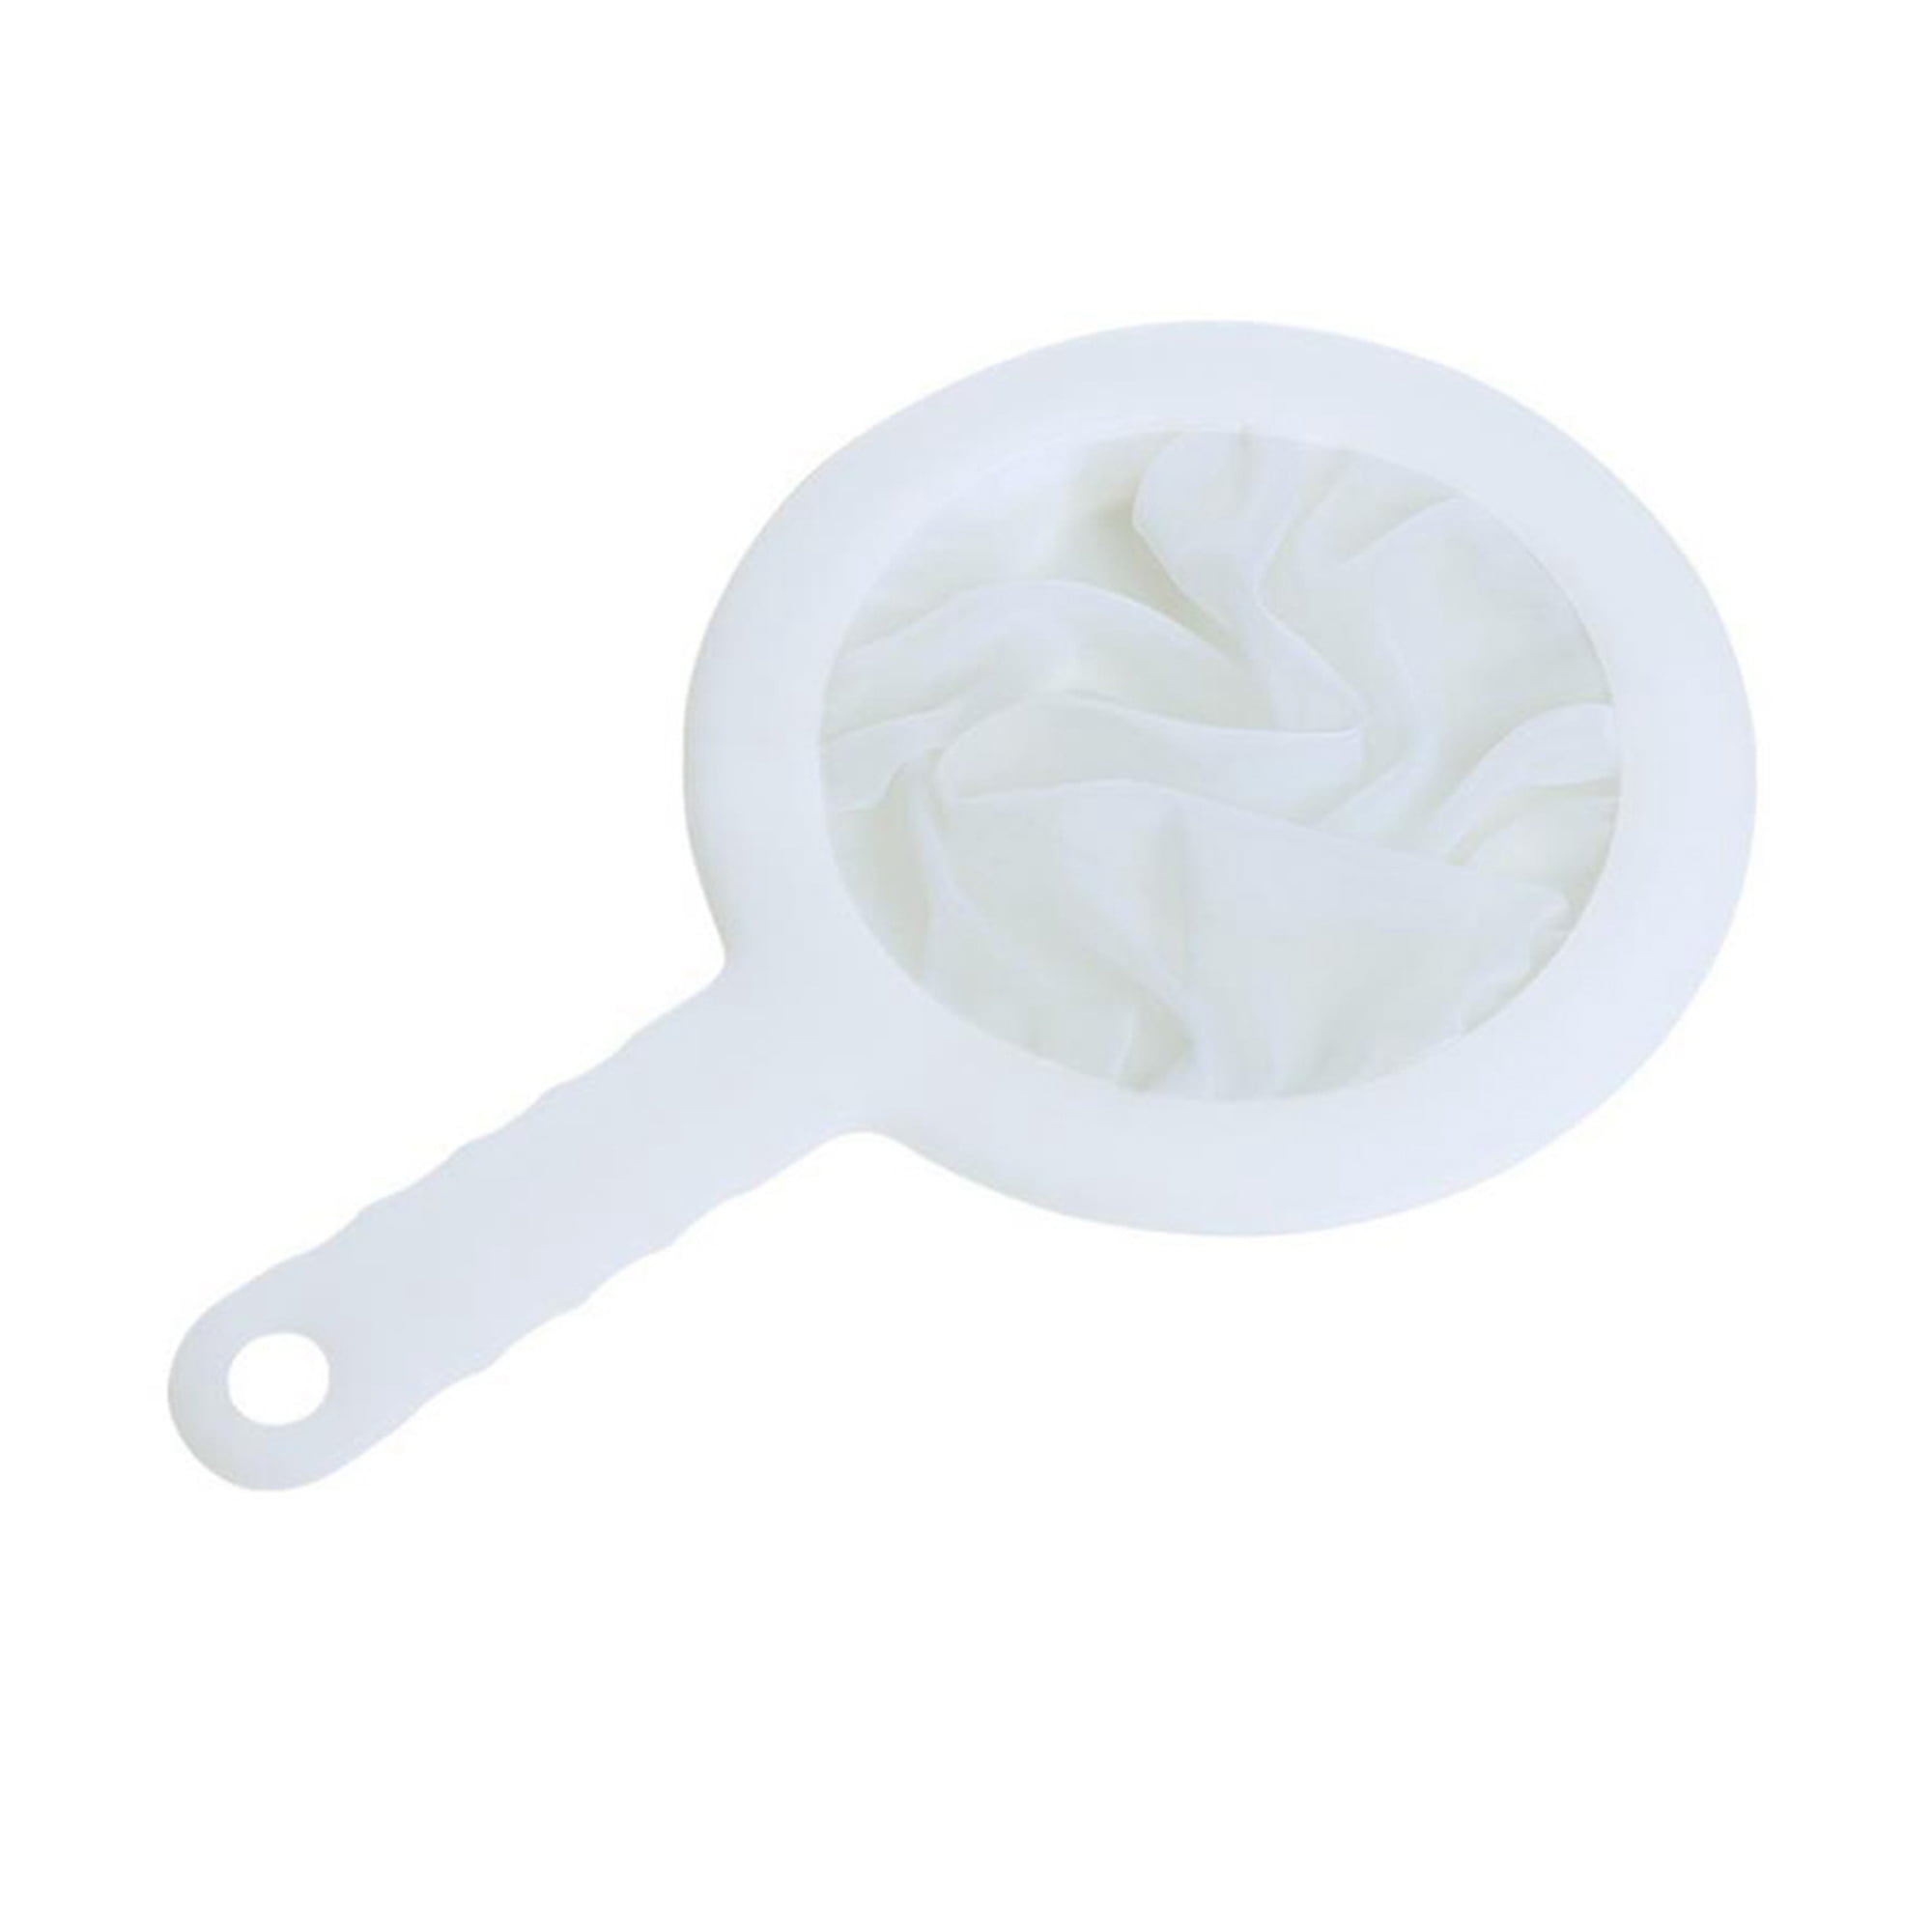 Wilton Duo Silicone Melting Pot Insert For item # 2104-9006 